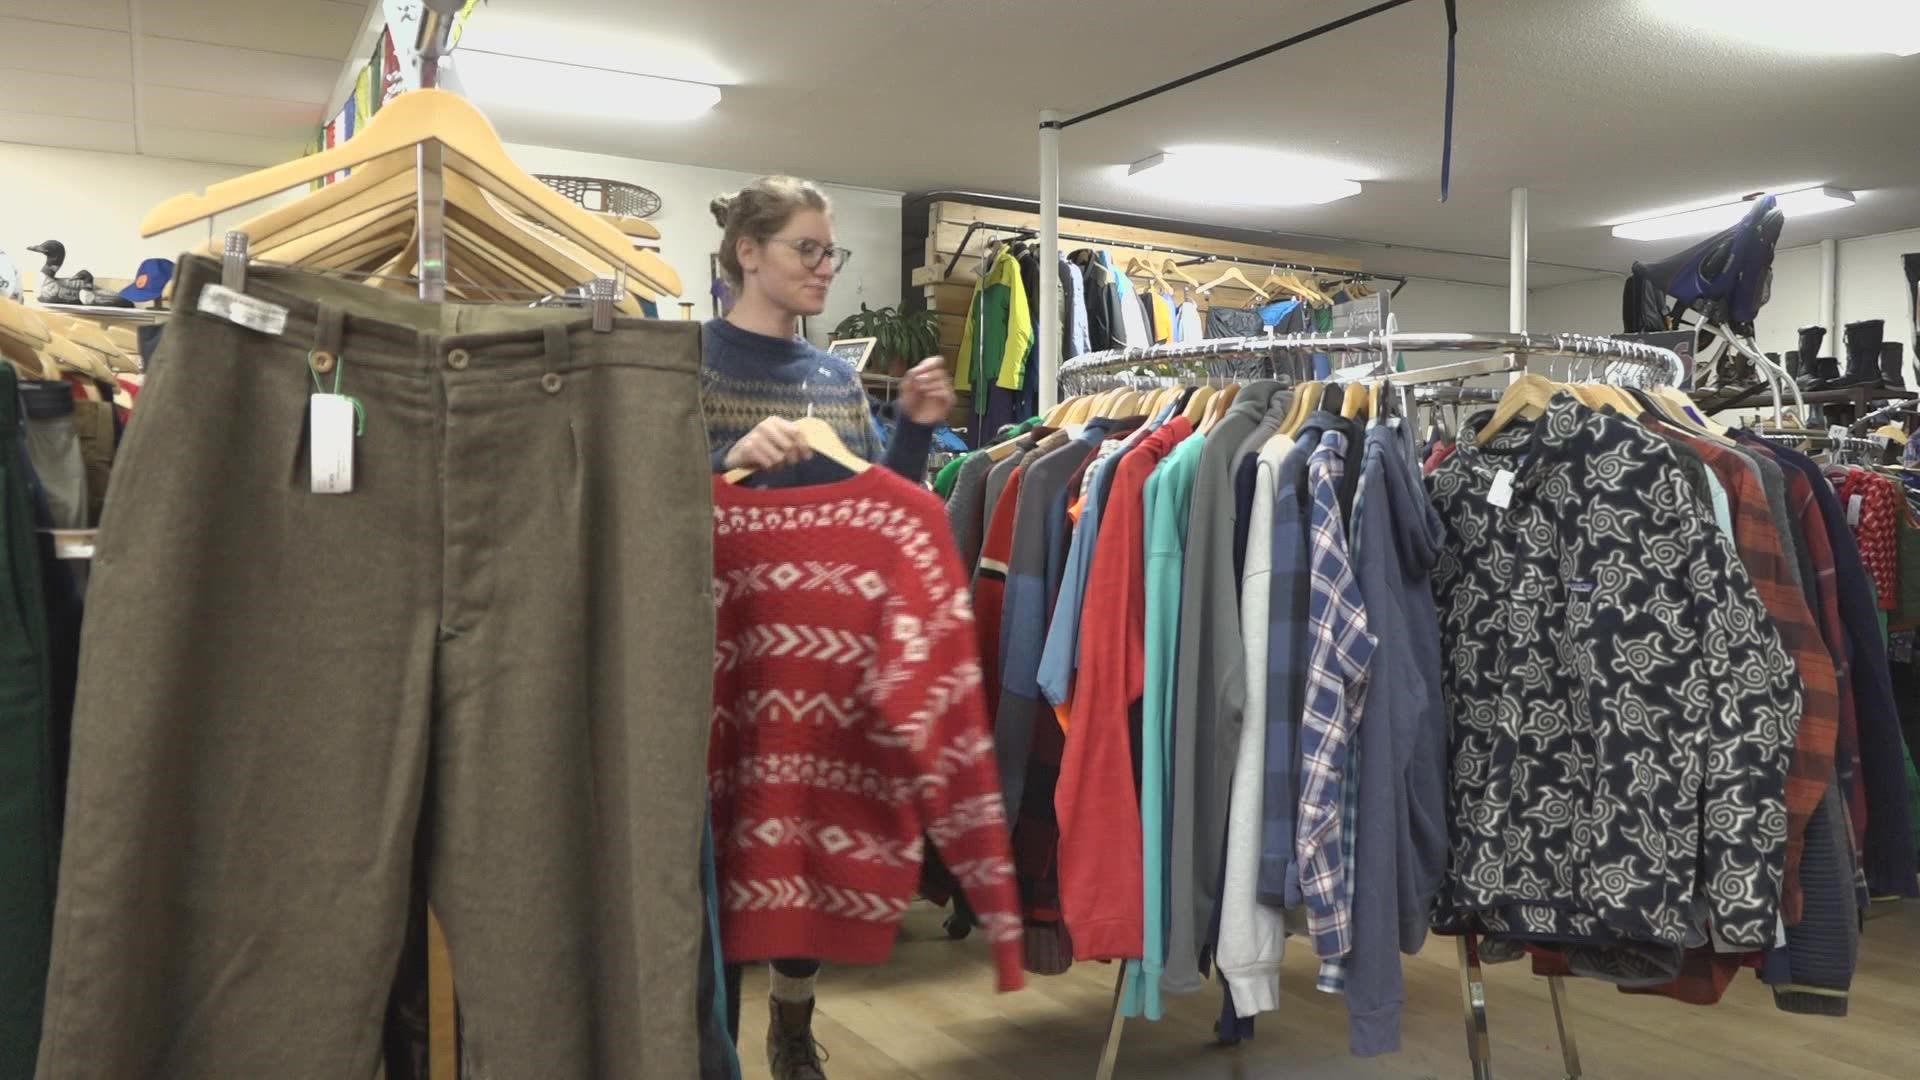 Now is the time to consider selling your items to local consignment shops amid a growing industry.